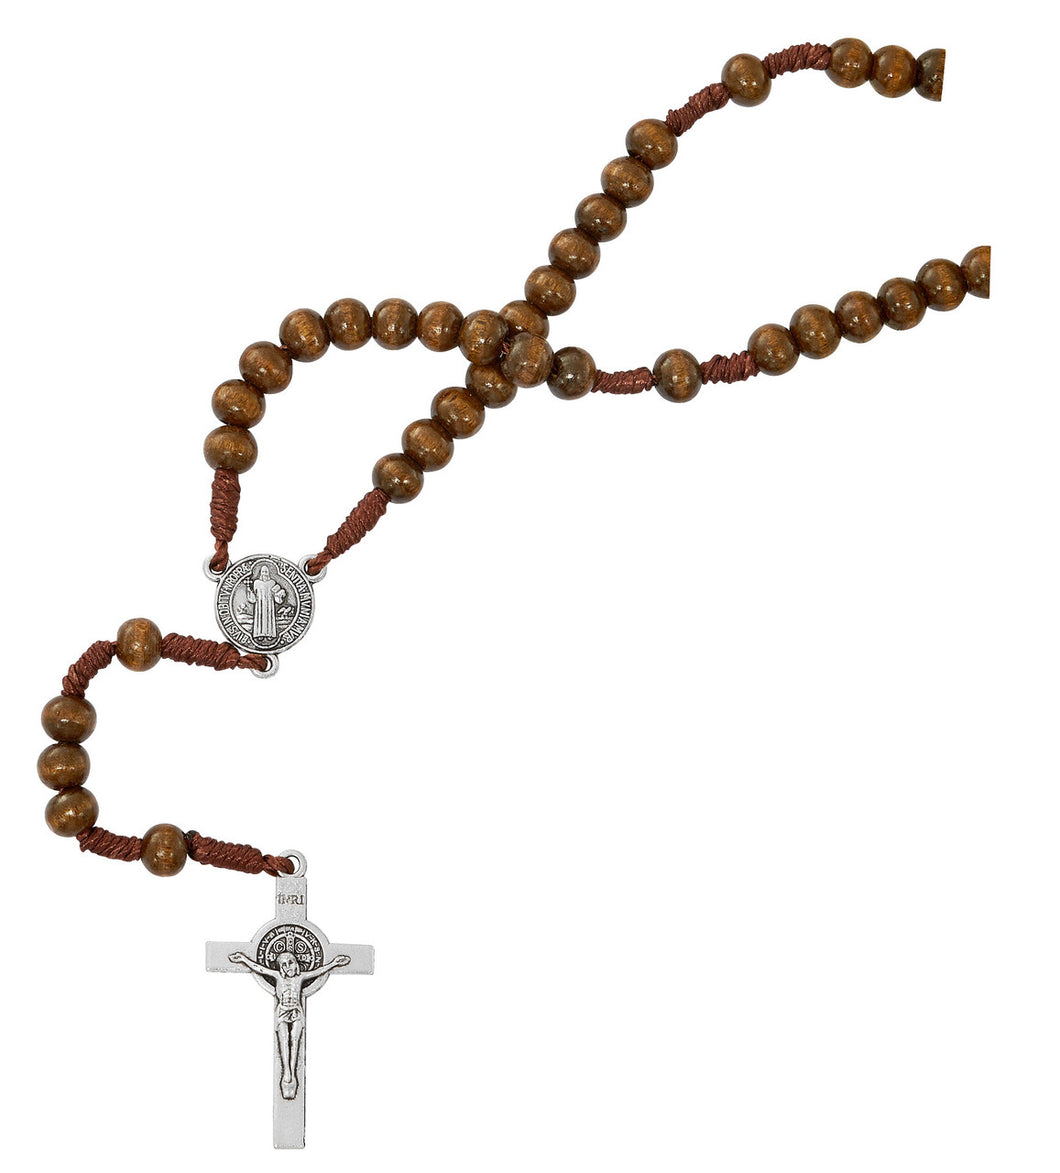 NECKLACE BROWN WOOD BEADS ST. BENEDICT MEDAL AND CRUCIFIX